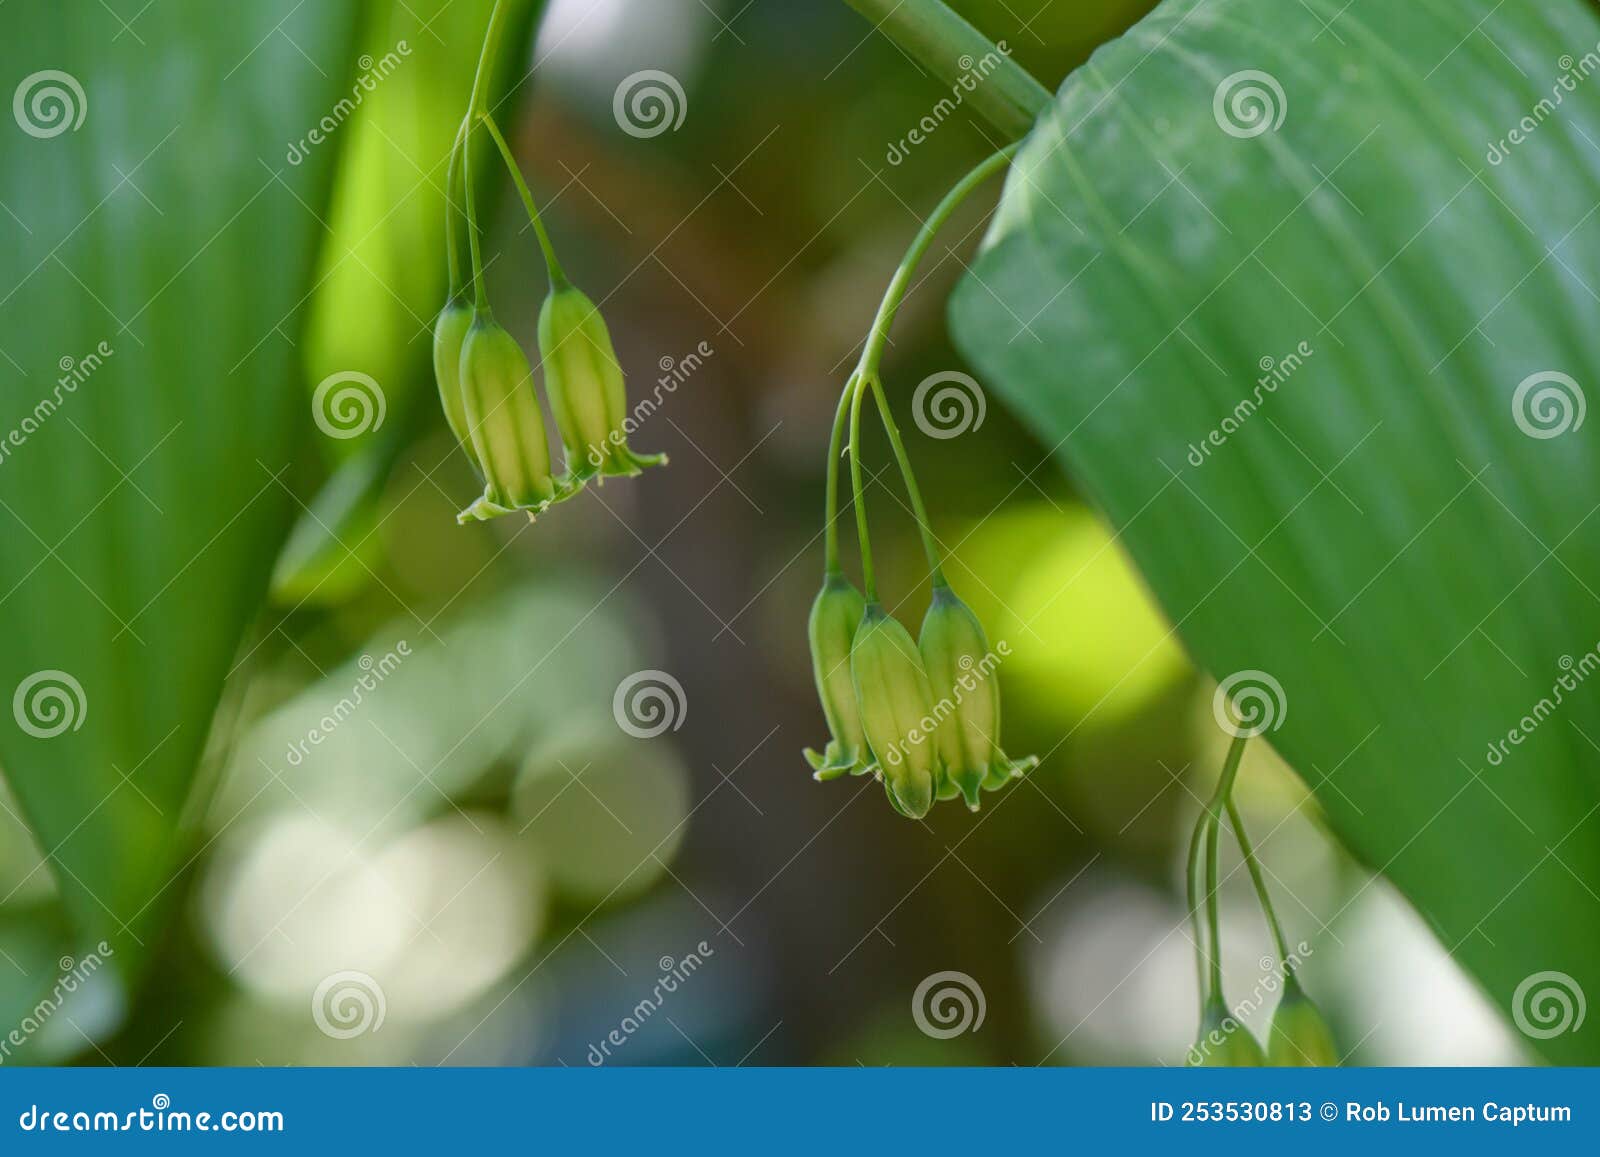 hairy solomons seal polygonatum pubescens bell-d flowers in pale yellowish green